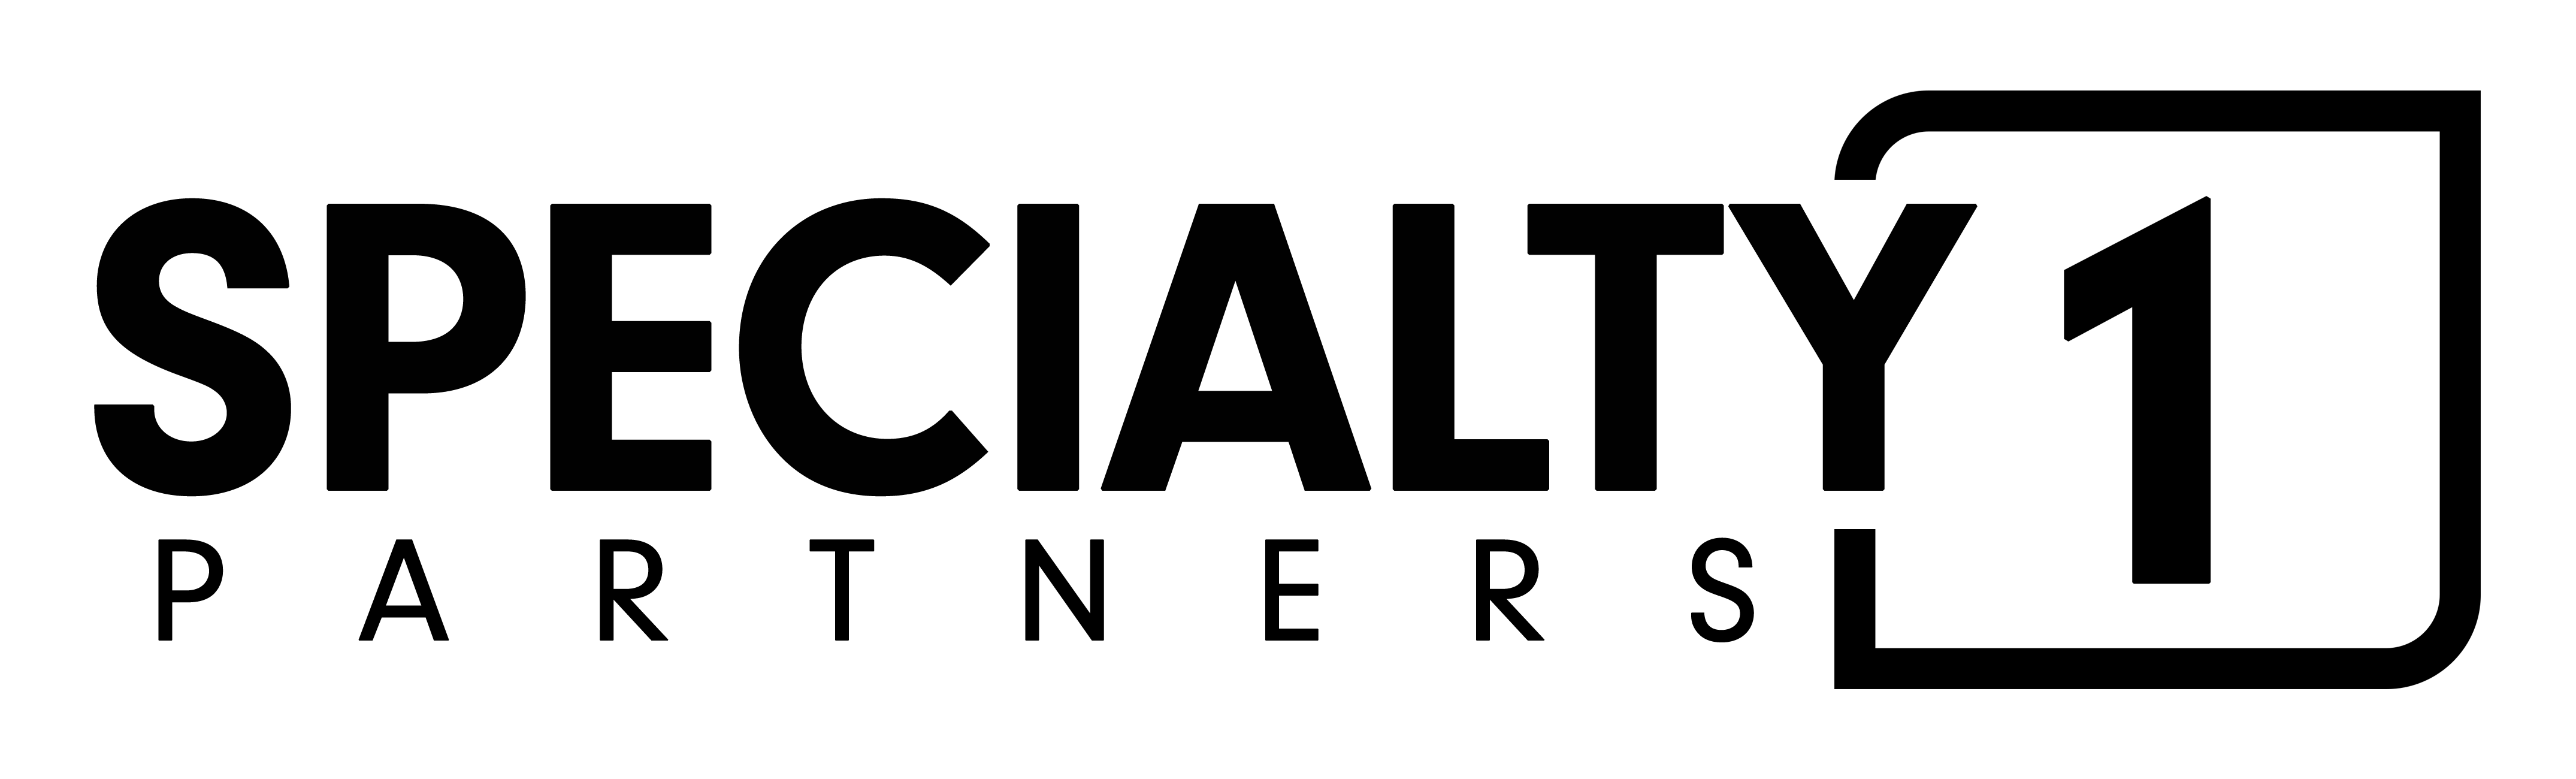 Specialty1_Primary Logo[Black] transparent.png